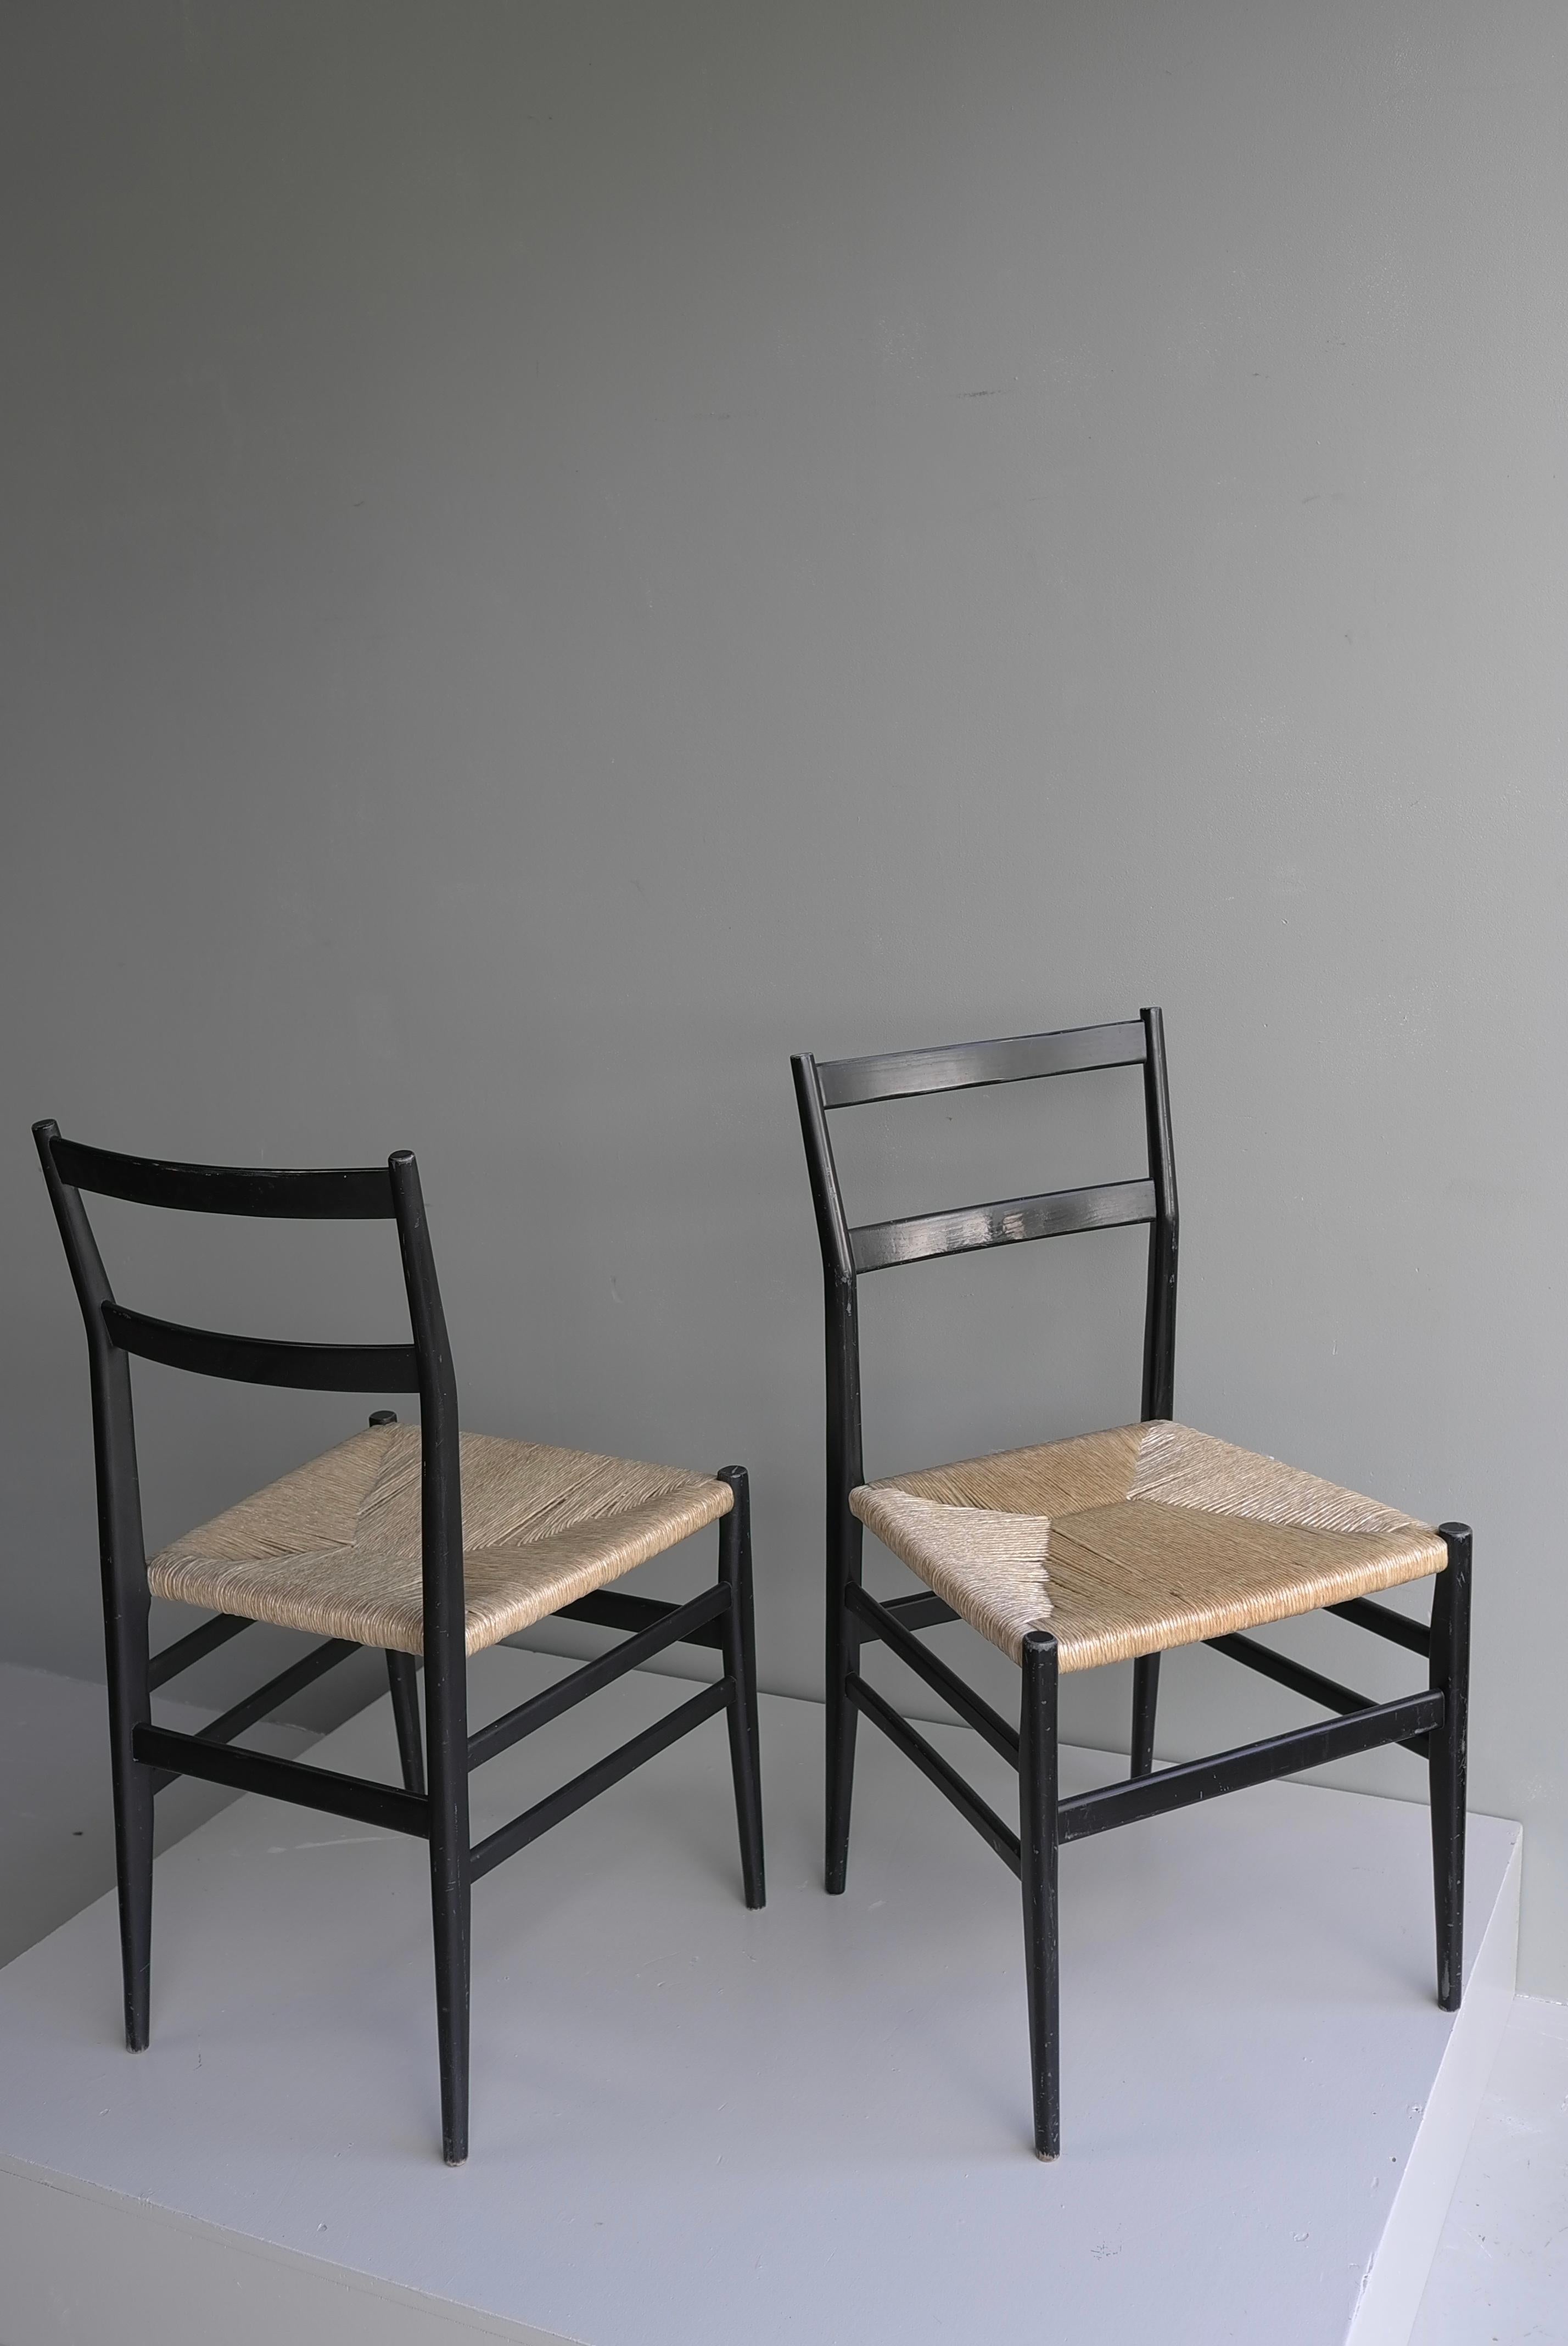 Pair of Black Gio Ponti Leggera Chairs with Cord Seat, Italy, 1951 For Sale 1